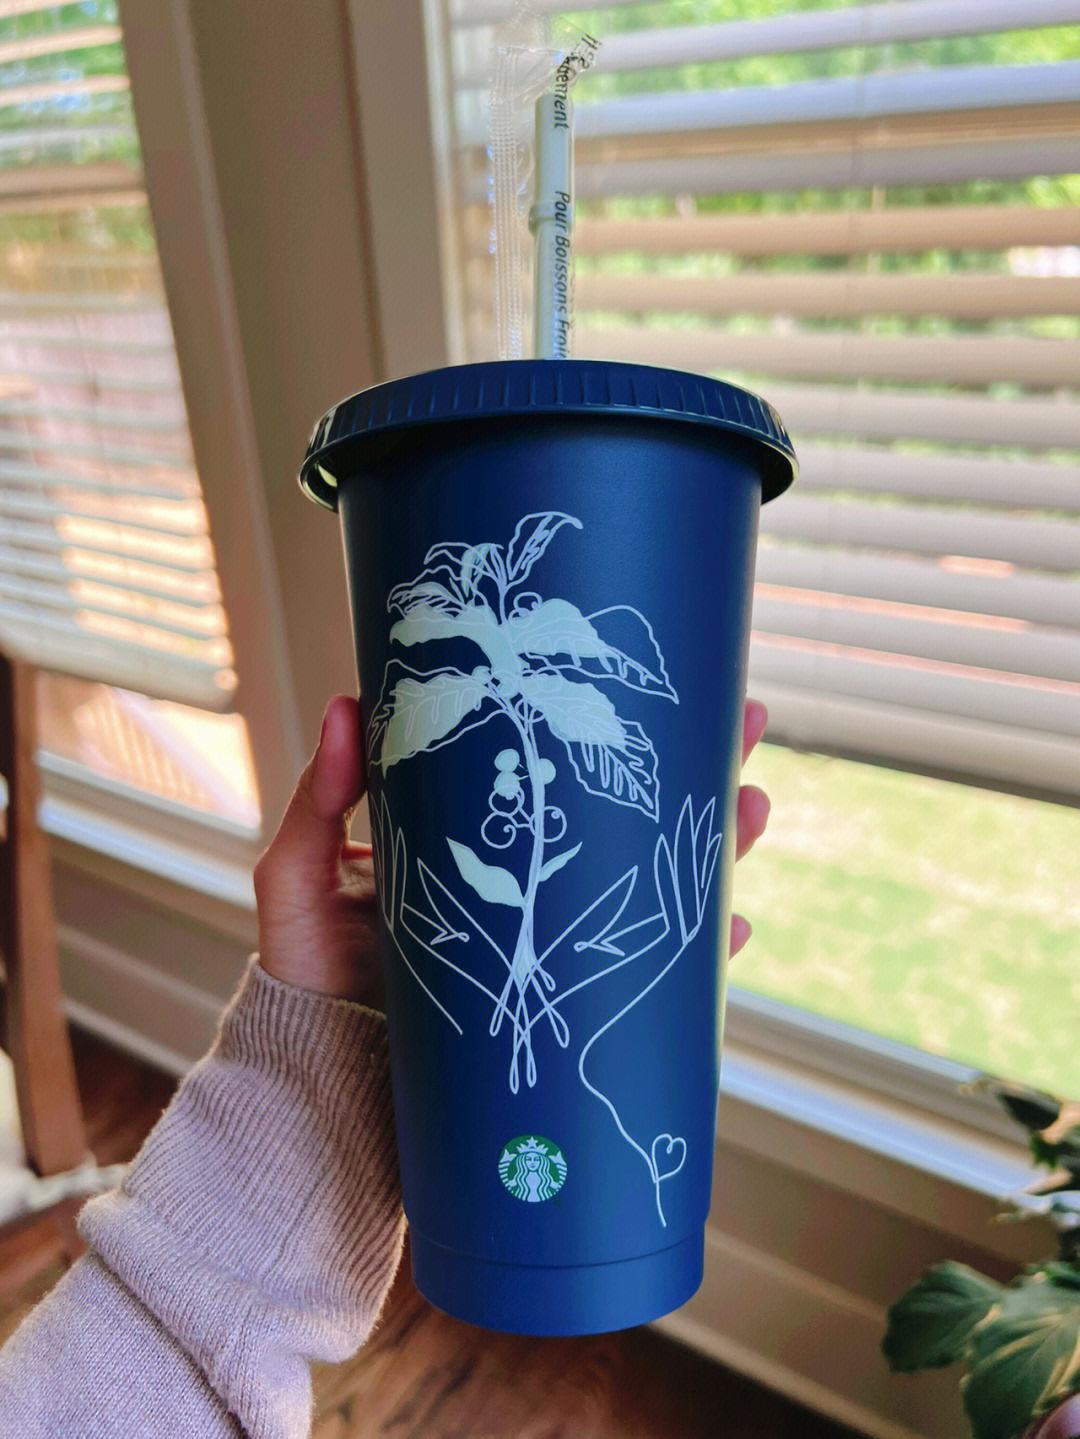 Where to Find the Blue Starbucks Cup A Complete Guide